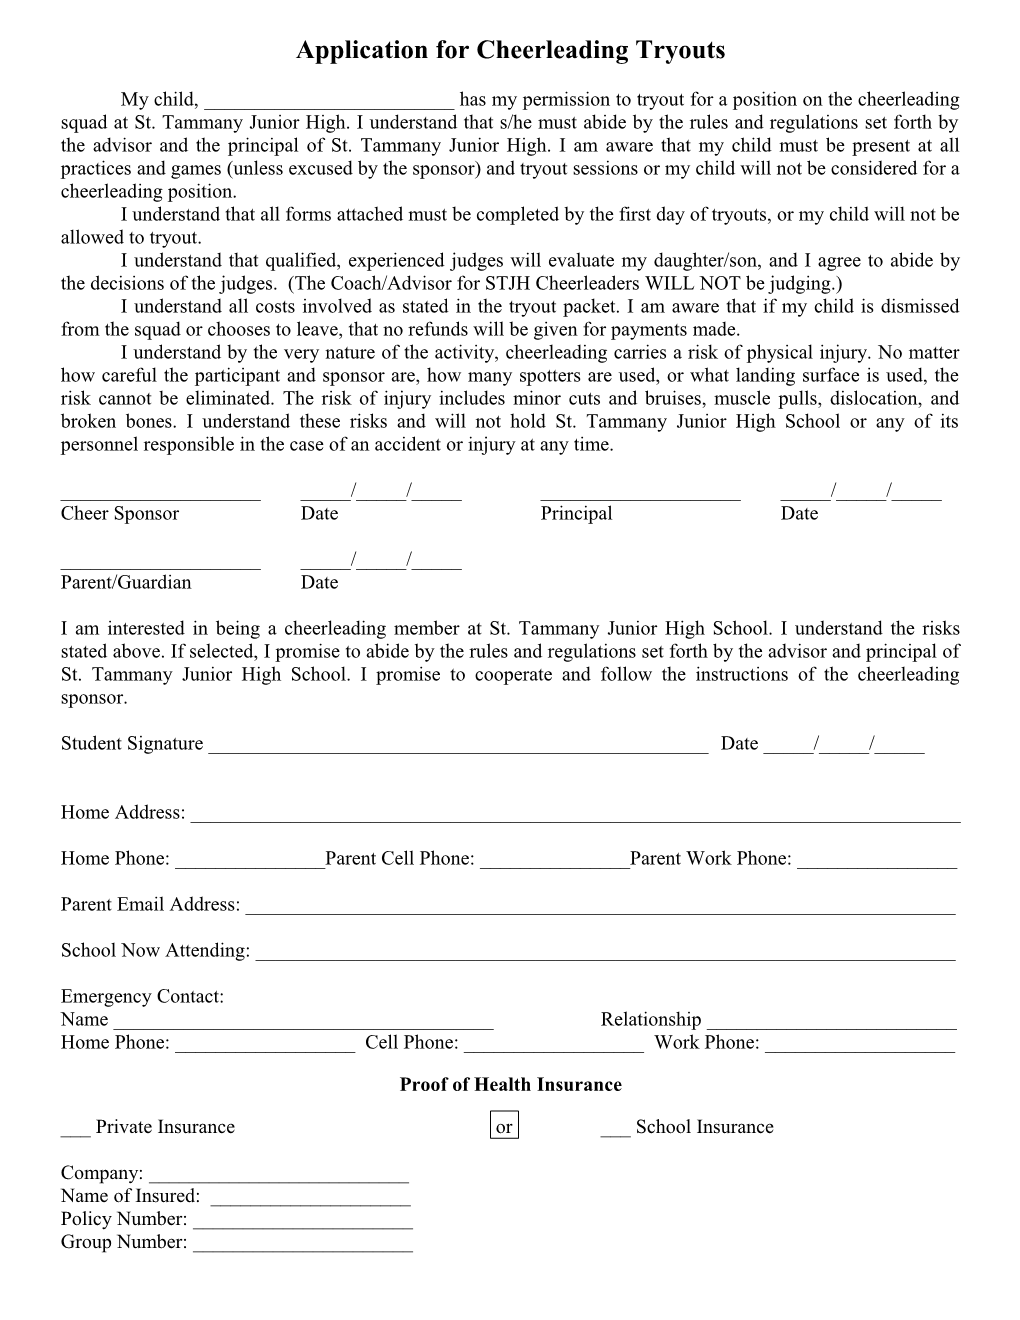 Application for Cheerleading Tryouts